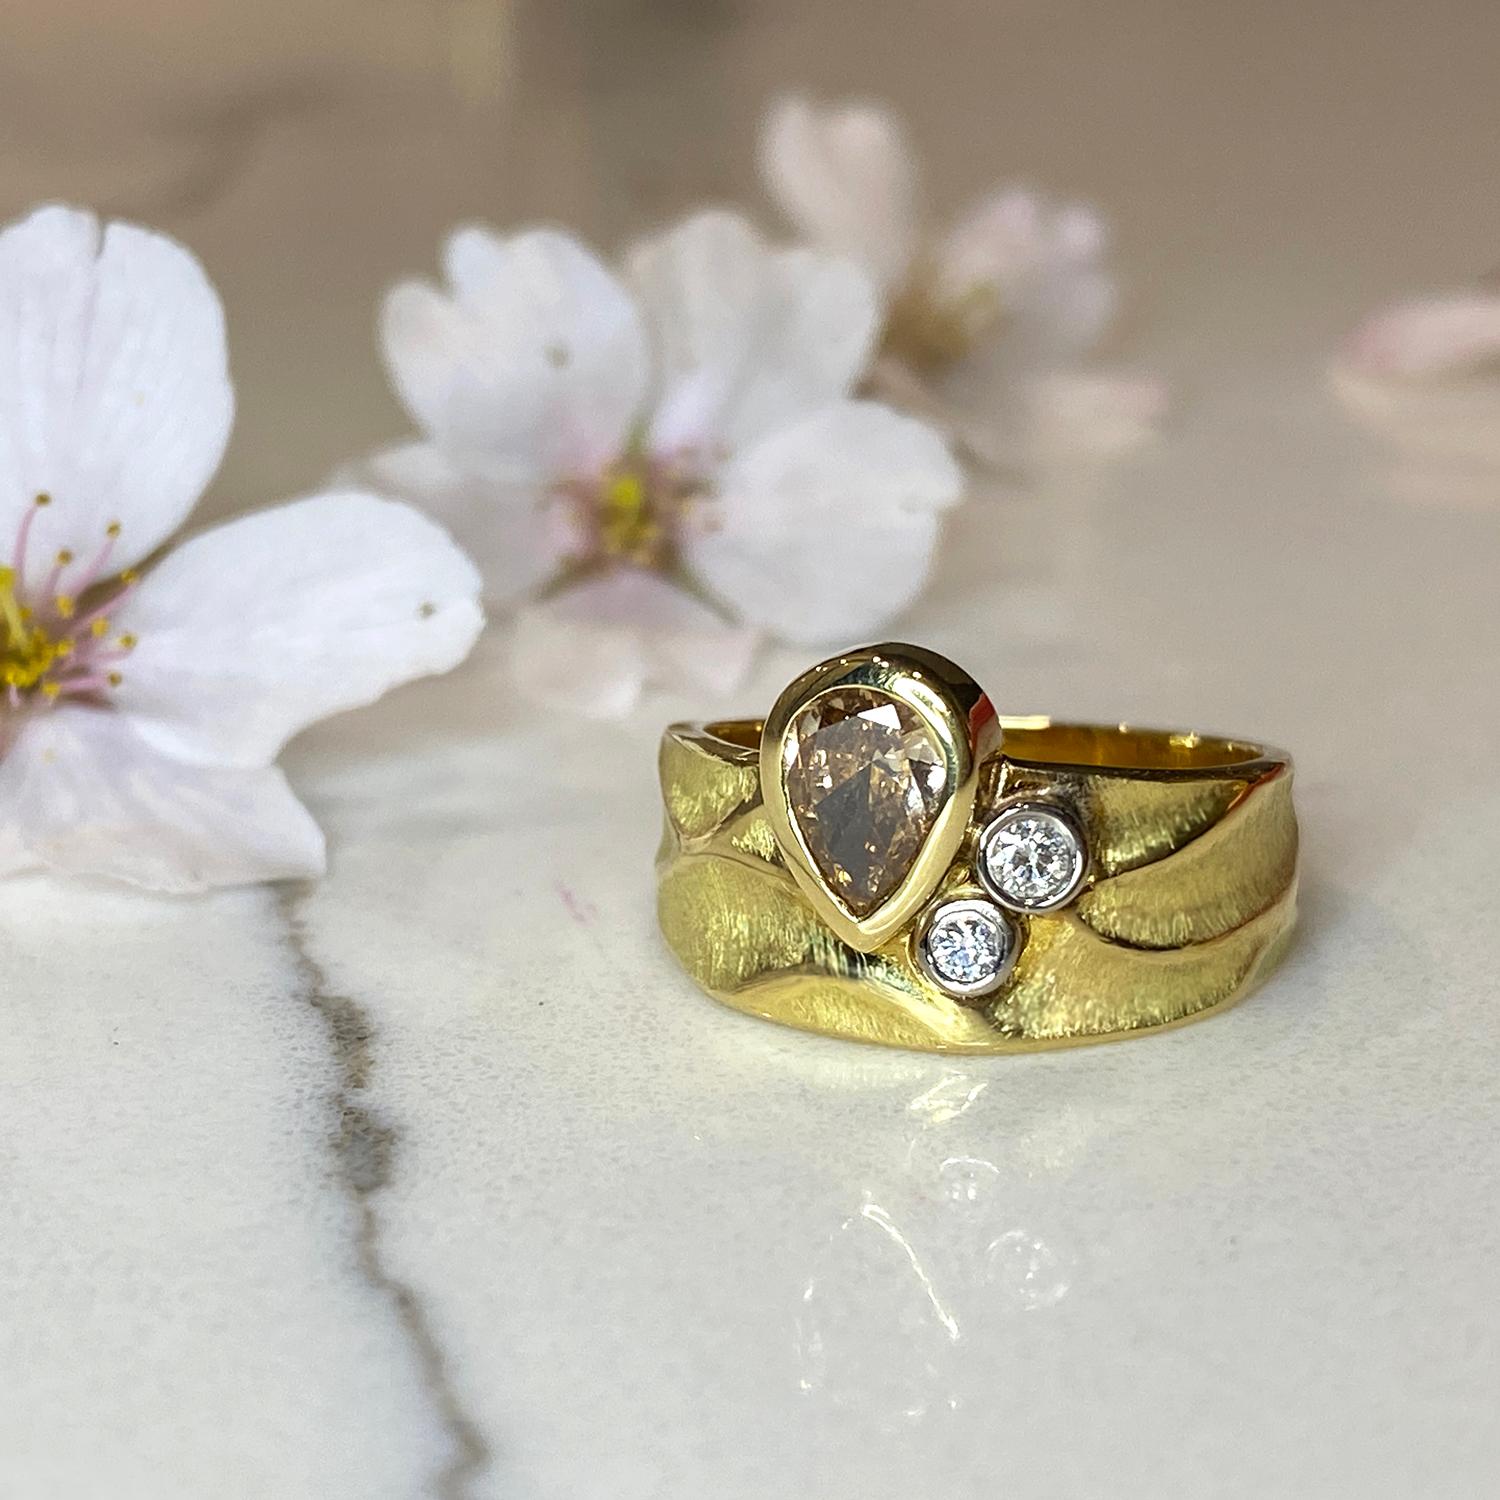 K.Mita's one-of-a-kind 18 Karat Yellow Gold Rebecca Ring features a 0.46 Carat Brown Diamond accented with two White Diamonds (0.07 Carats total weight) set in 18 Karat Palladium White Gold. The contemporary ring is 11.5 mm x 19.5 mm x 21 mm. The